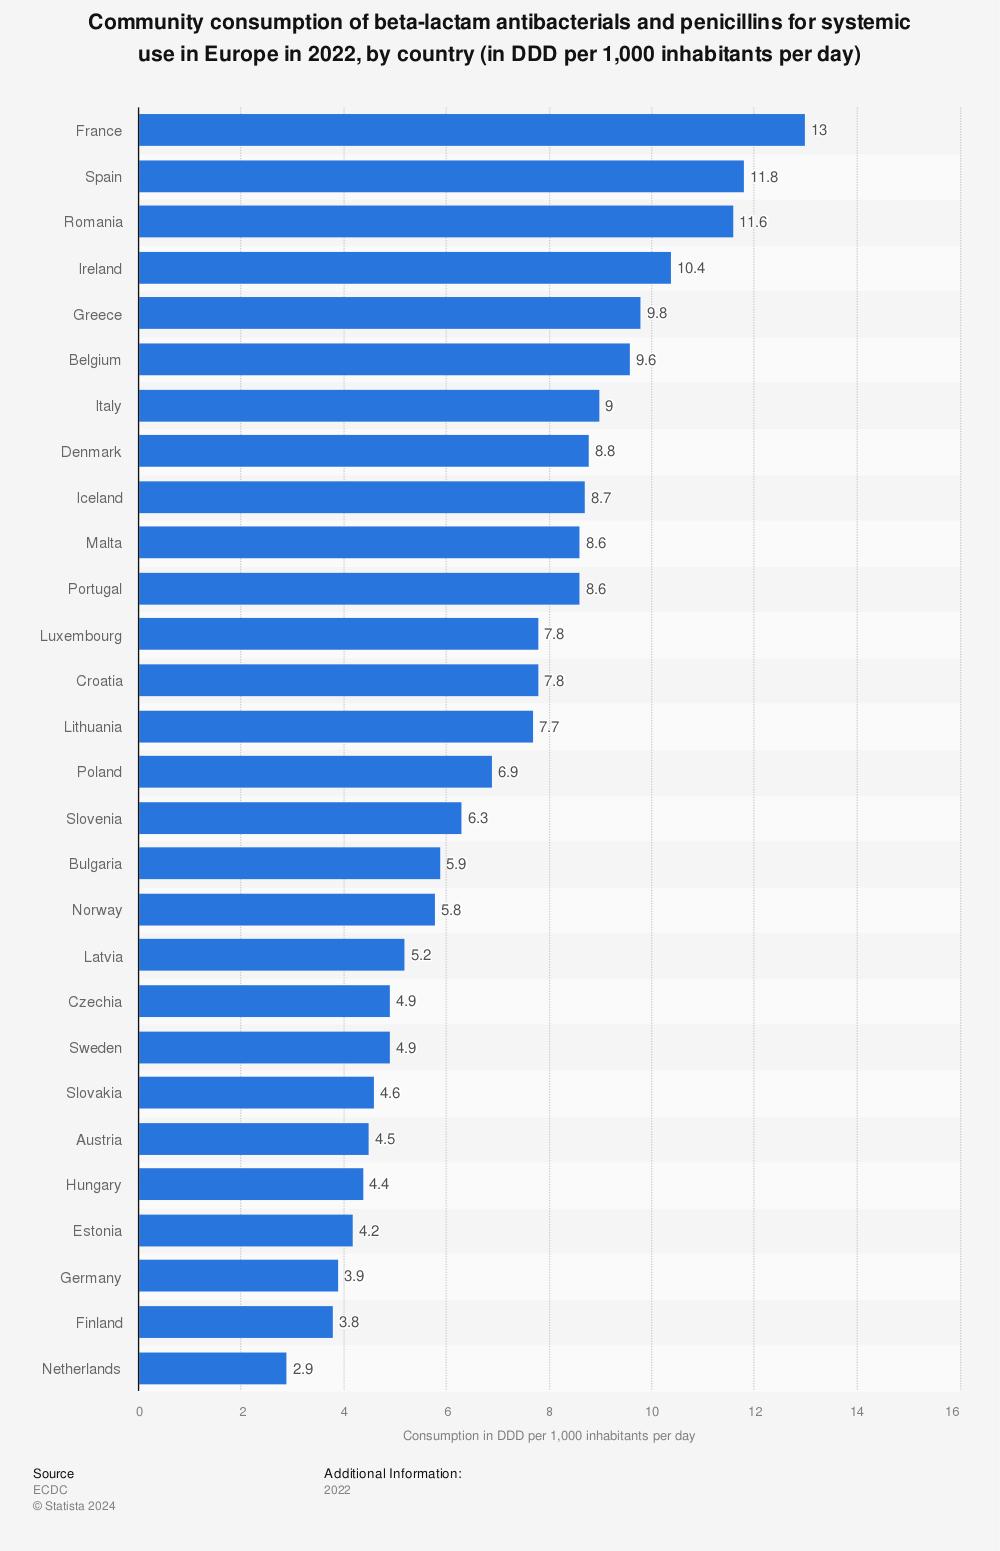 Statistic: Community consumption of beta-lactam antibacterials and penicillins for systemic use in Europe in 2020, by country* (in DDD per 1,000 inhabitants per day) | Statista